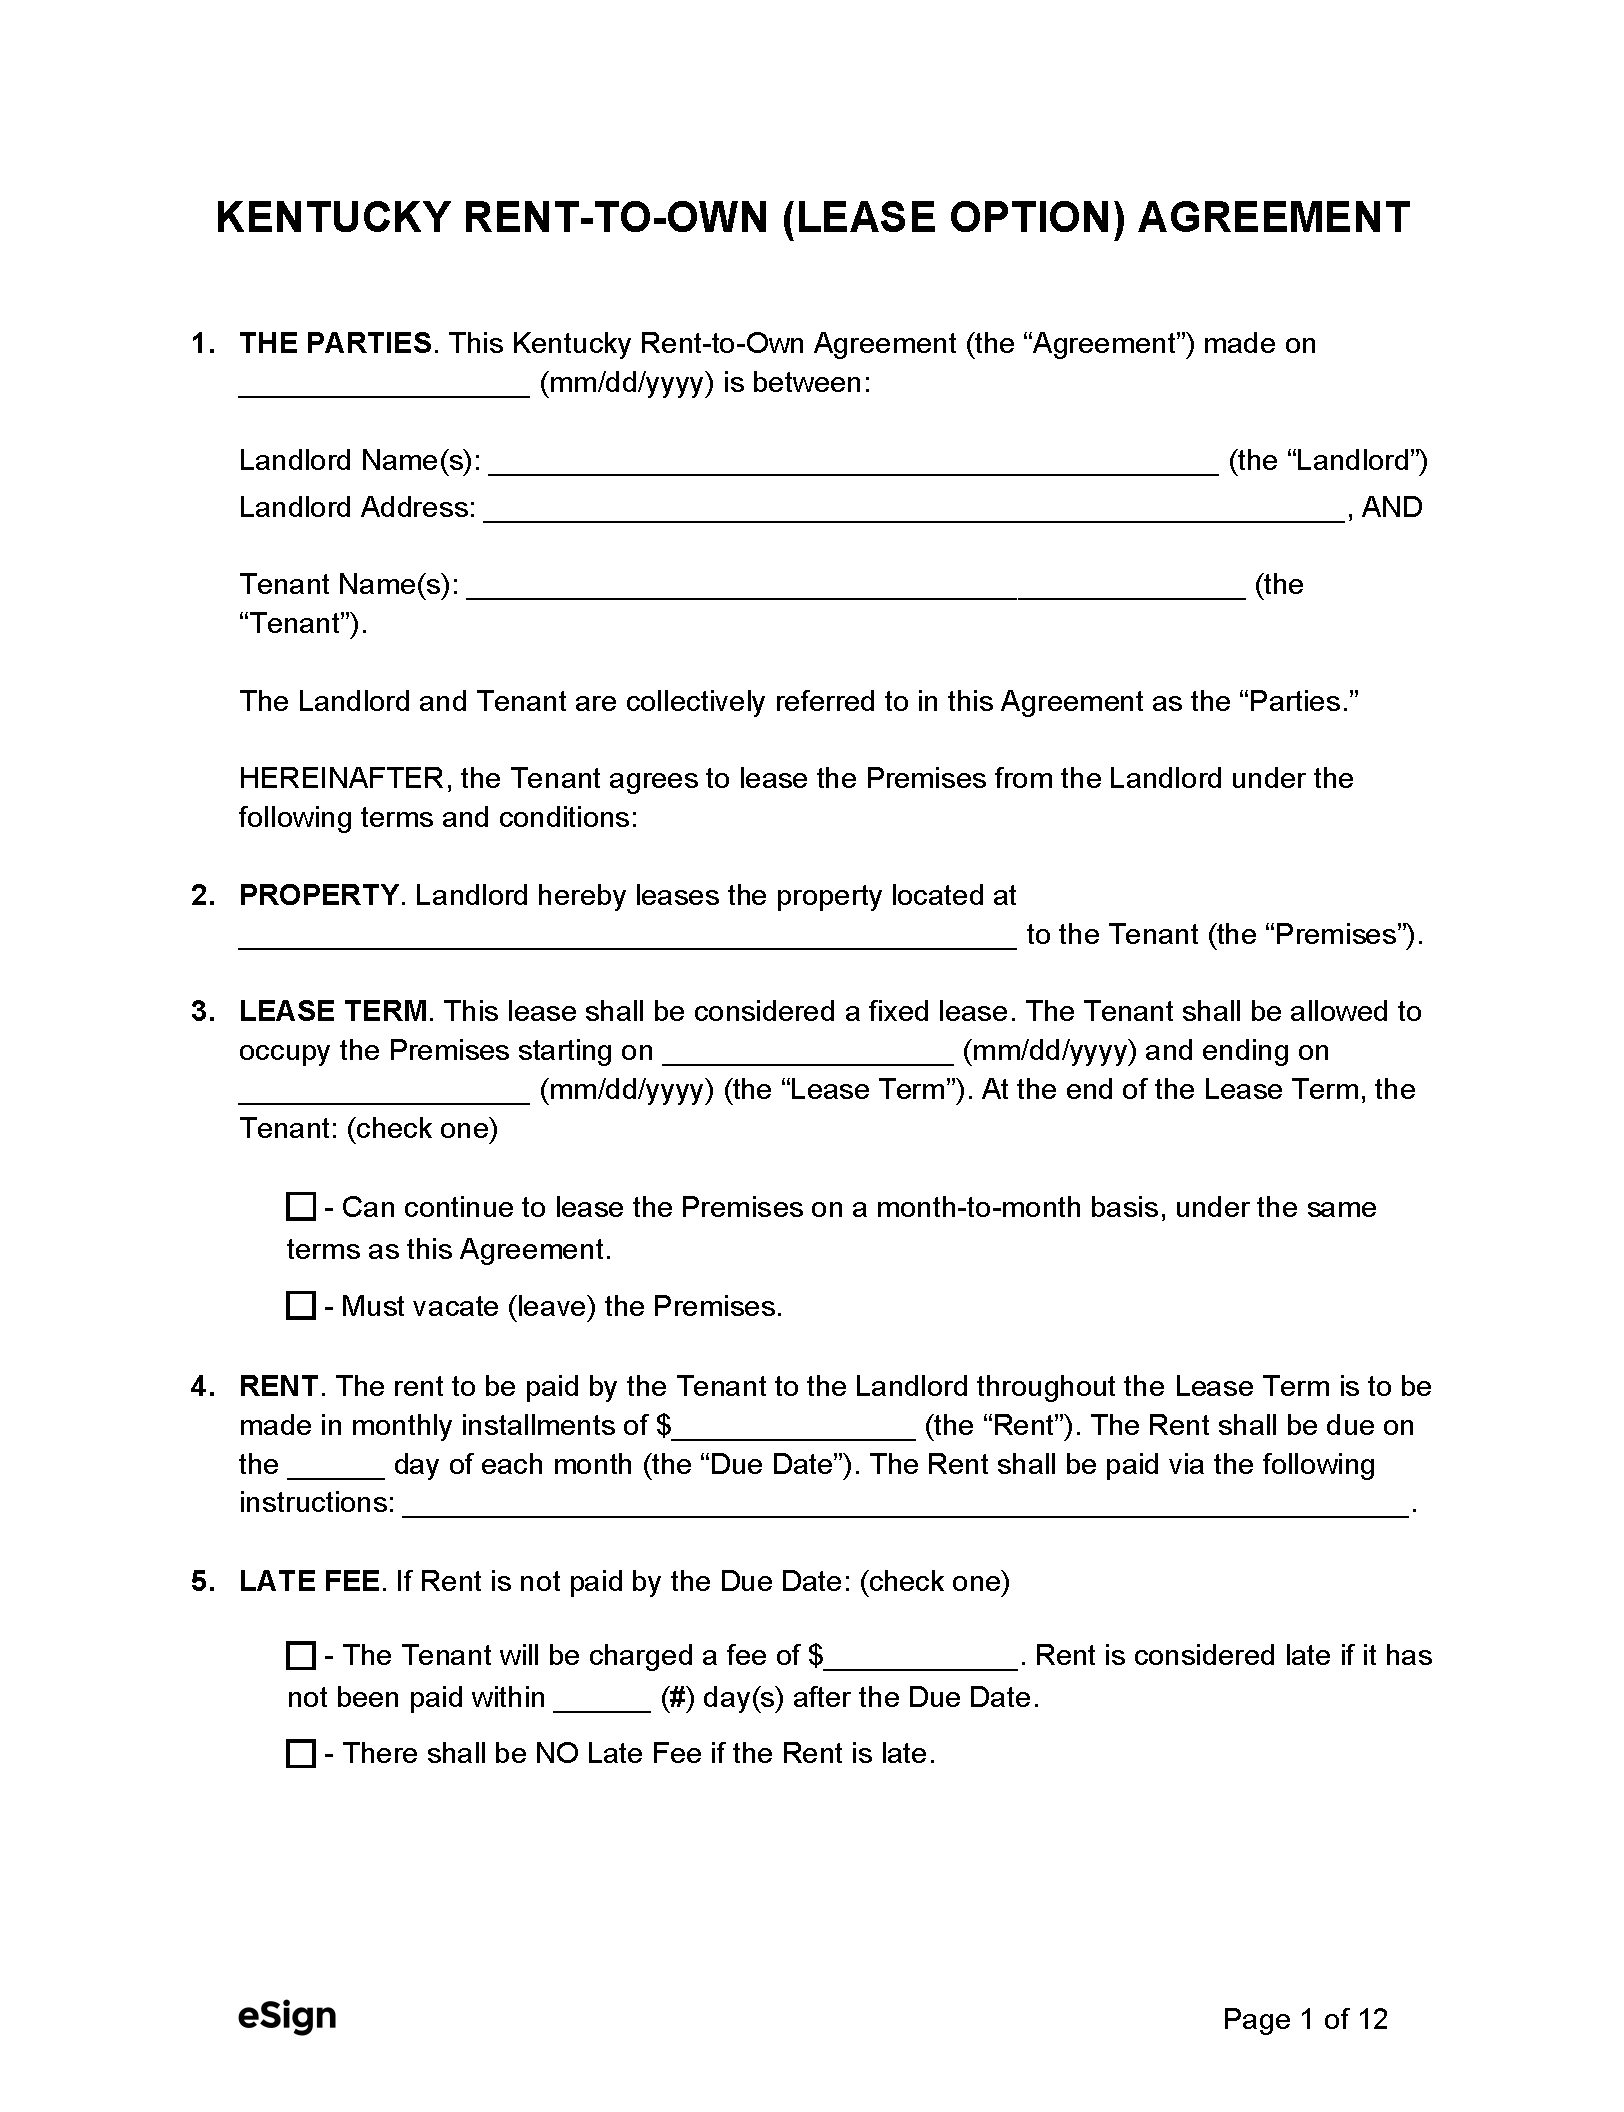 free-kentucky-rent-to-own-lease-option-agreement-pdf-word